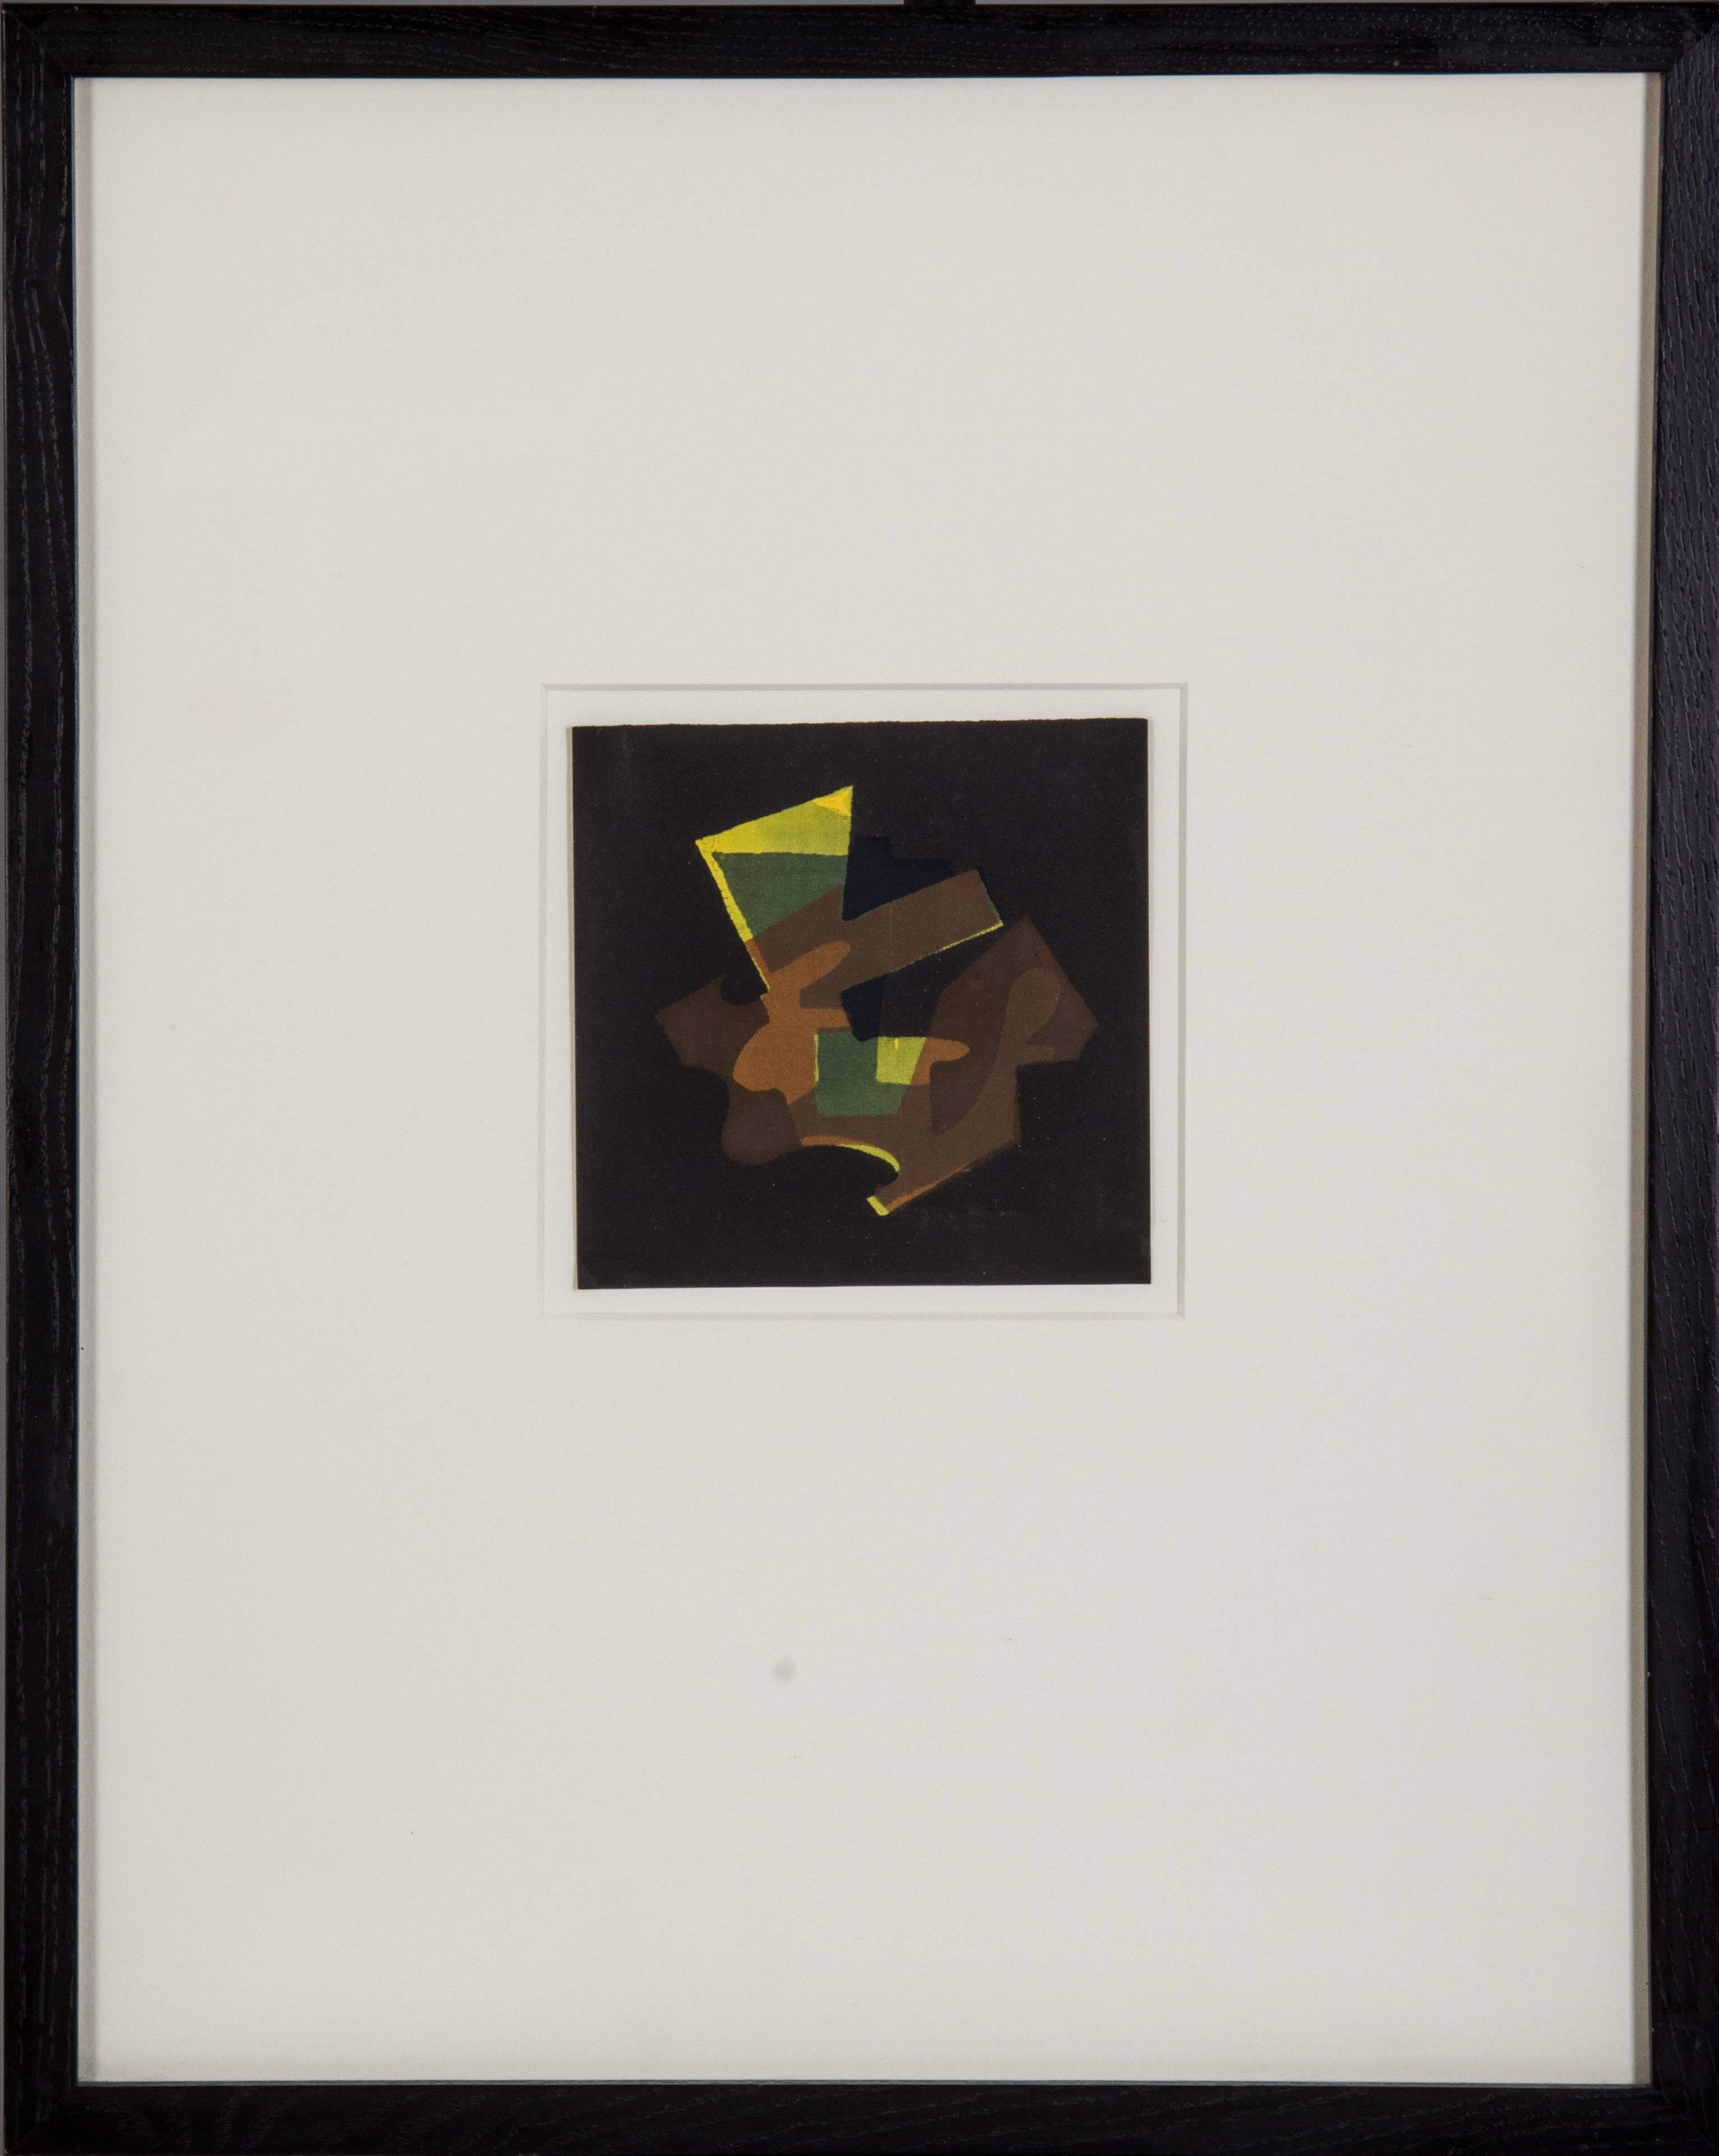 This modernist print is marked 26 out of an edition of 215 and is signed. The piece measures 5